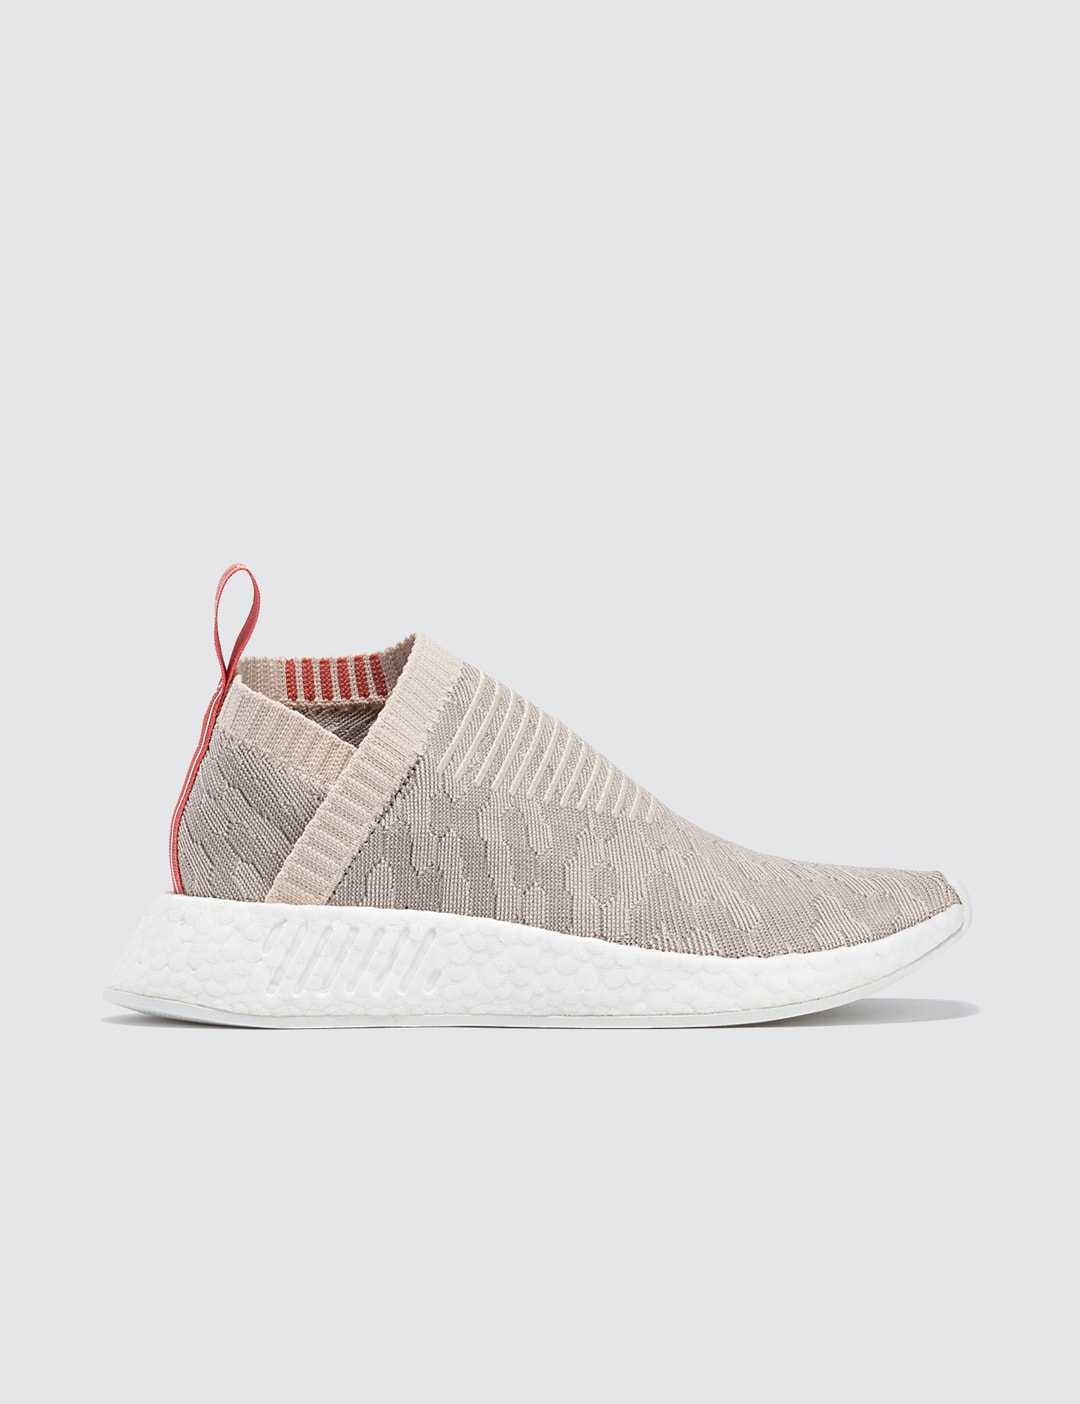 Adidas Originals - NMD CS2 PK | HBX - Globally Curated Fashion and Lifestyle by Hypebeast